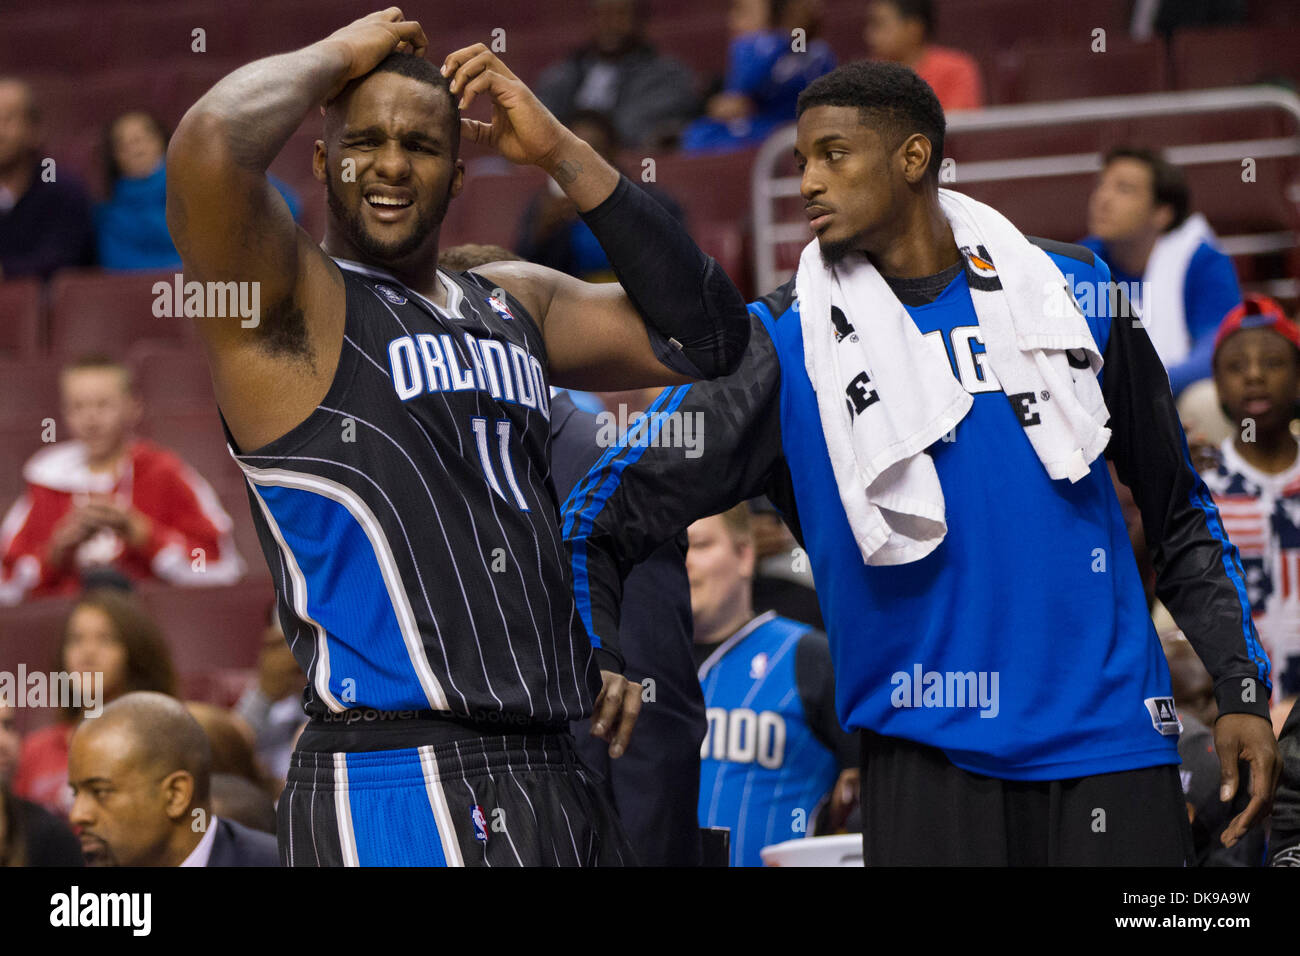 December 3, 2013: Orlando Magic power forward Glen Davis (11) reacts to getting fouled out with power forward Solomon Jones (22) by him during the NBA game between the Orlando Magic and the Philadelphia 76ers at the Wells Fargo Center in Philadelphia, Pennsylvania. The 76ers win 126-125 in double overtime. (Christopher Szagola/Cal Sport Media) Stock Photo